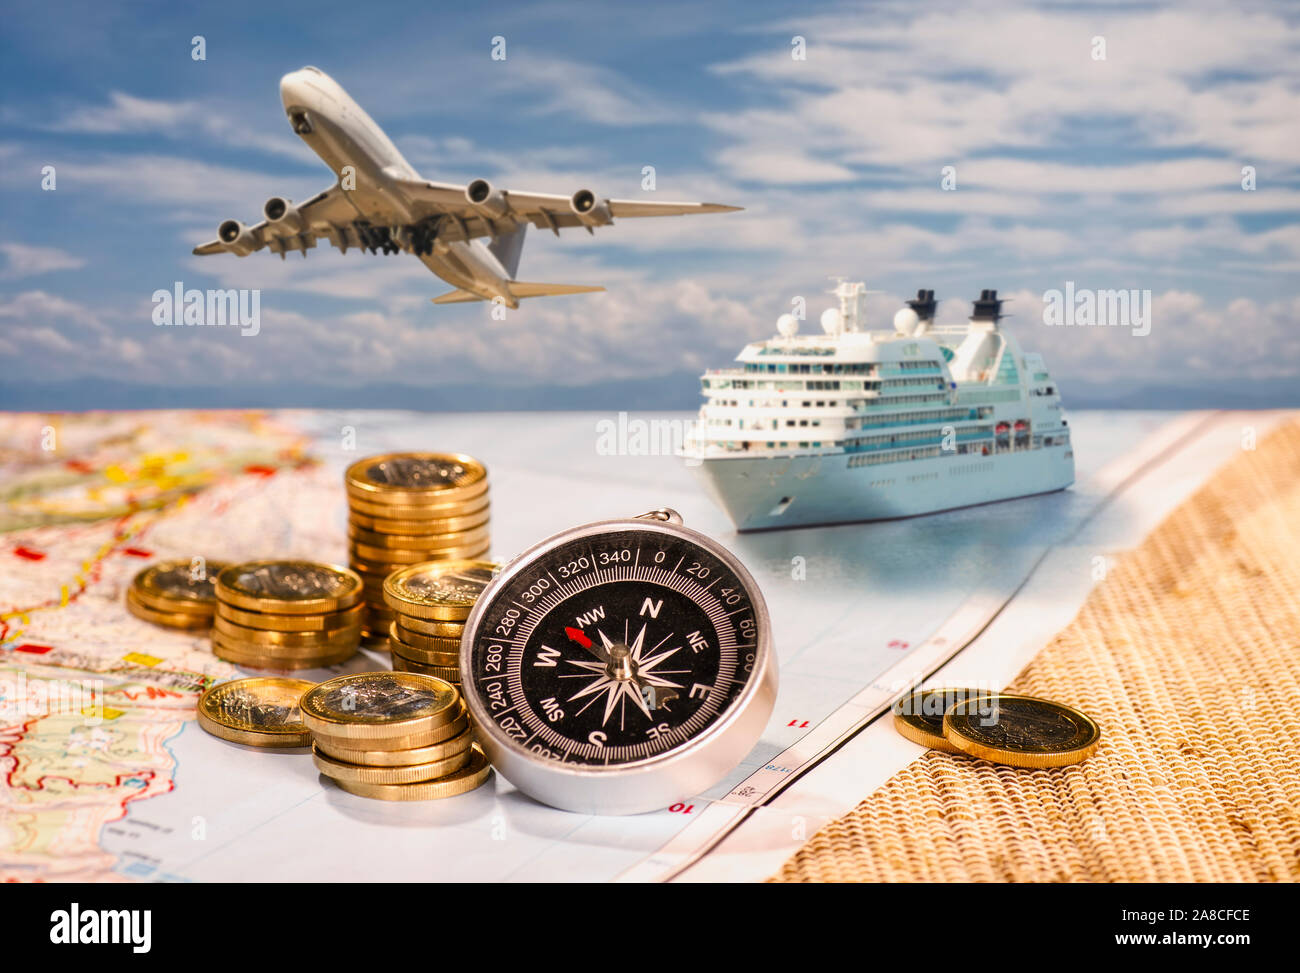 Airplane and cruise ship with compass and coins on a map Stock Photo